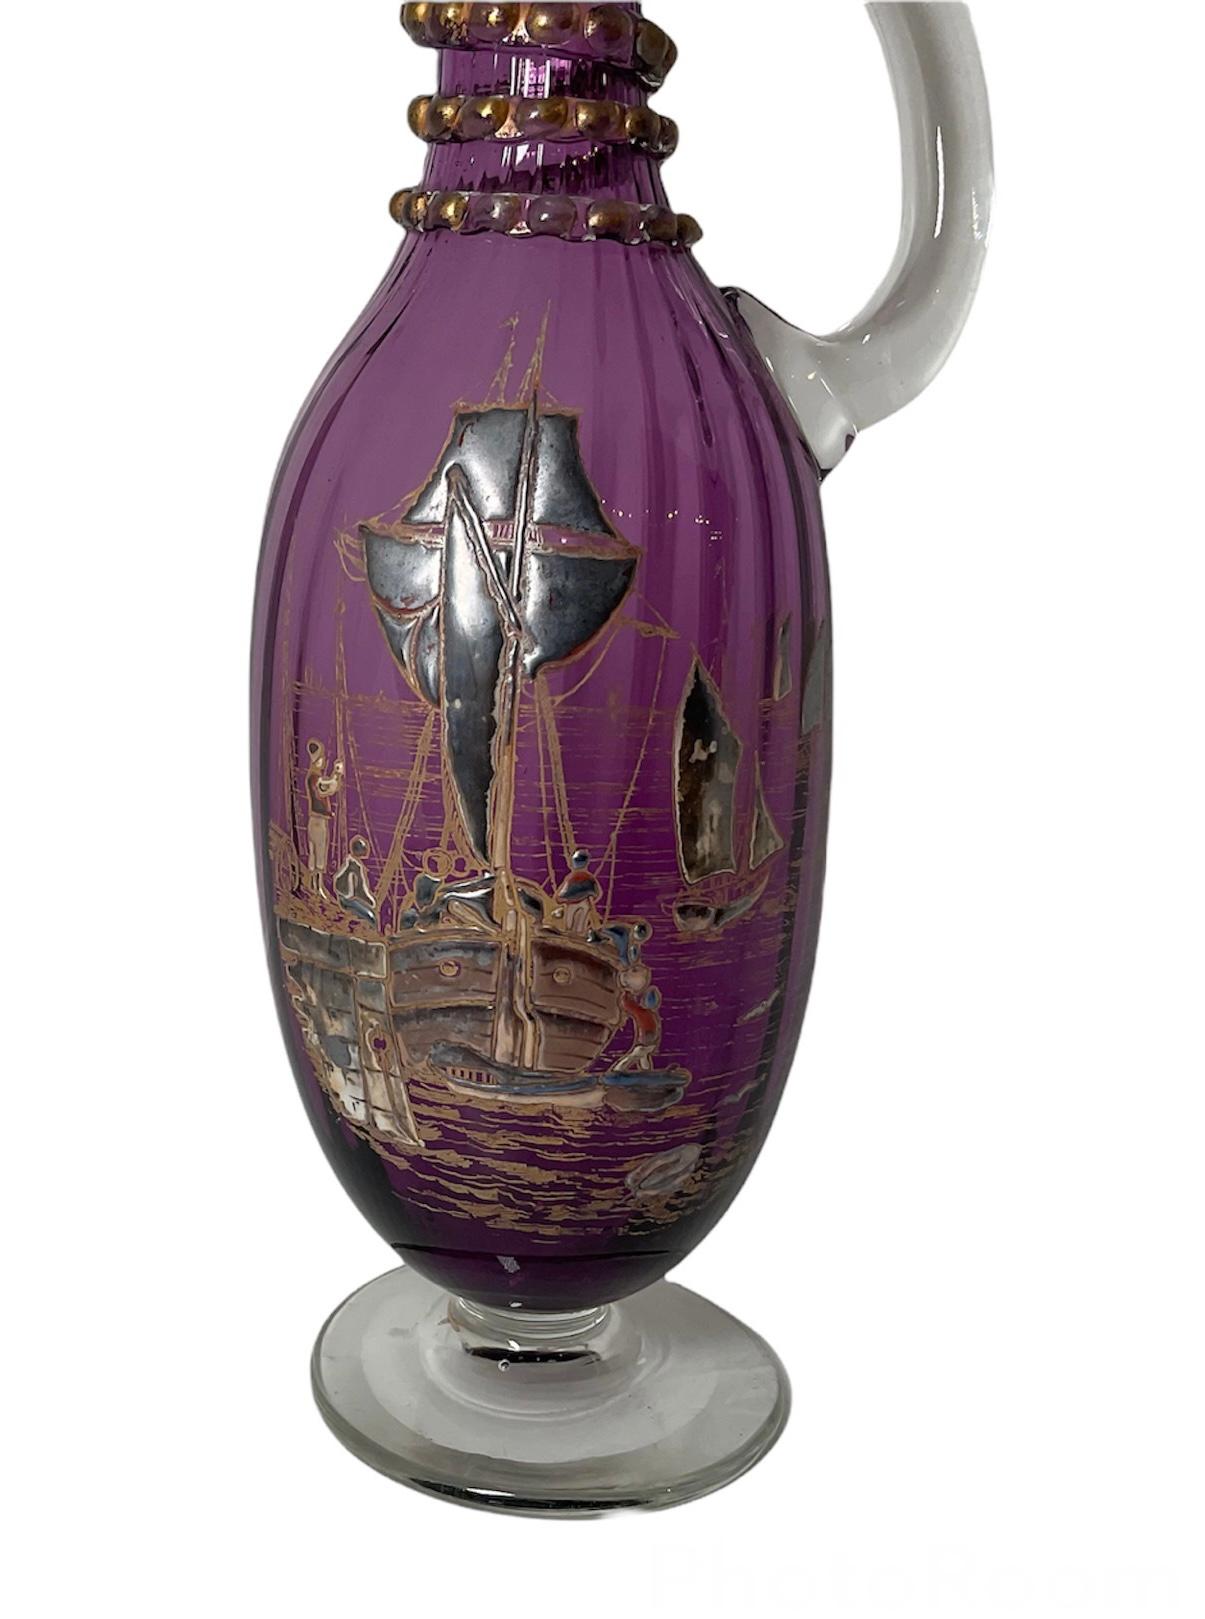 This is a rare Theodore Rossler purple glass wine decanter with large C-Shaped clear crystal handle following the “Color Cake” enamel technique. It depicts what appear to be an Asian scene of a Chinese Junk ship and boats with some fishermen in the